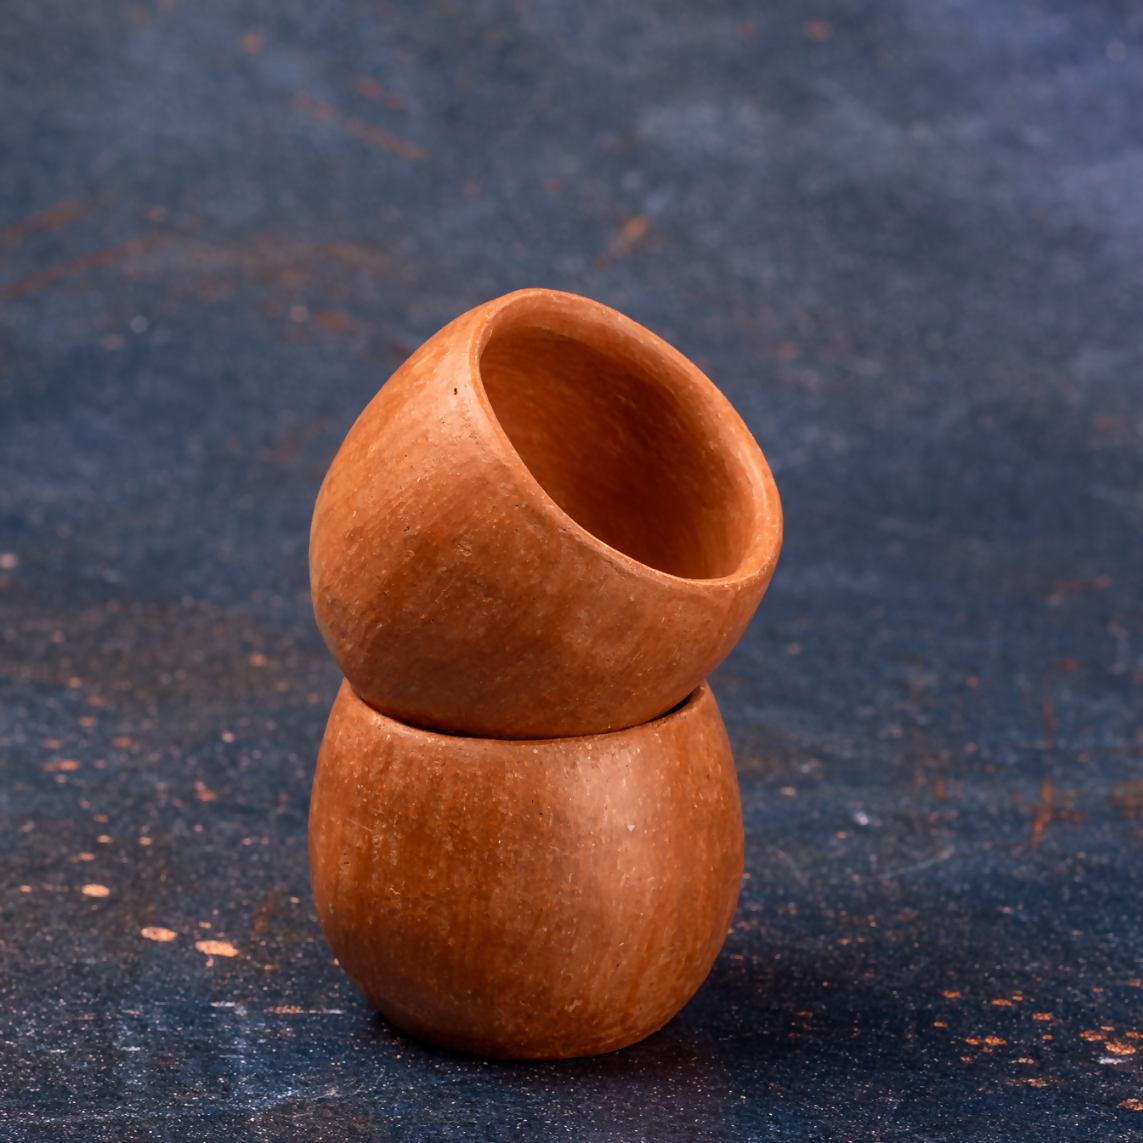 Clay Pottery Shot Glass